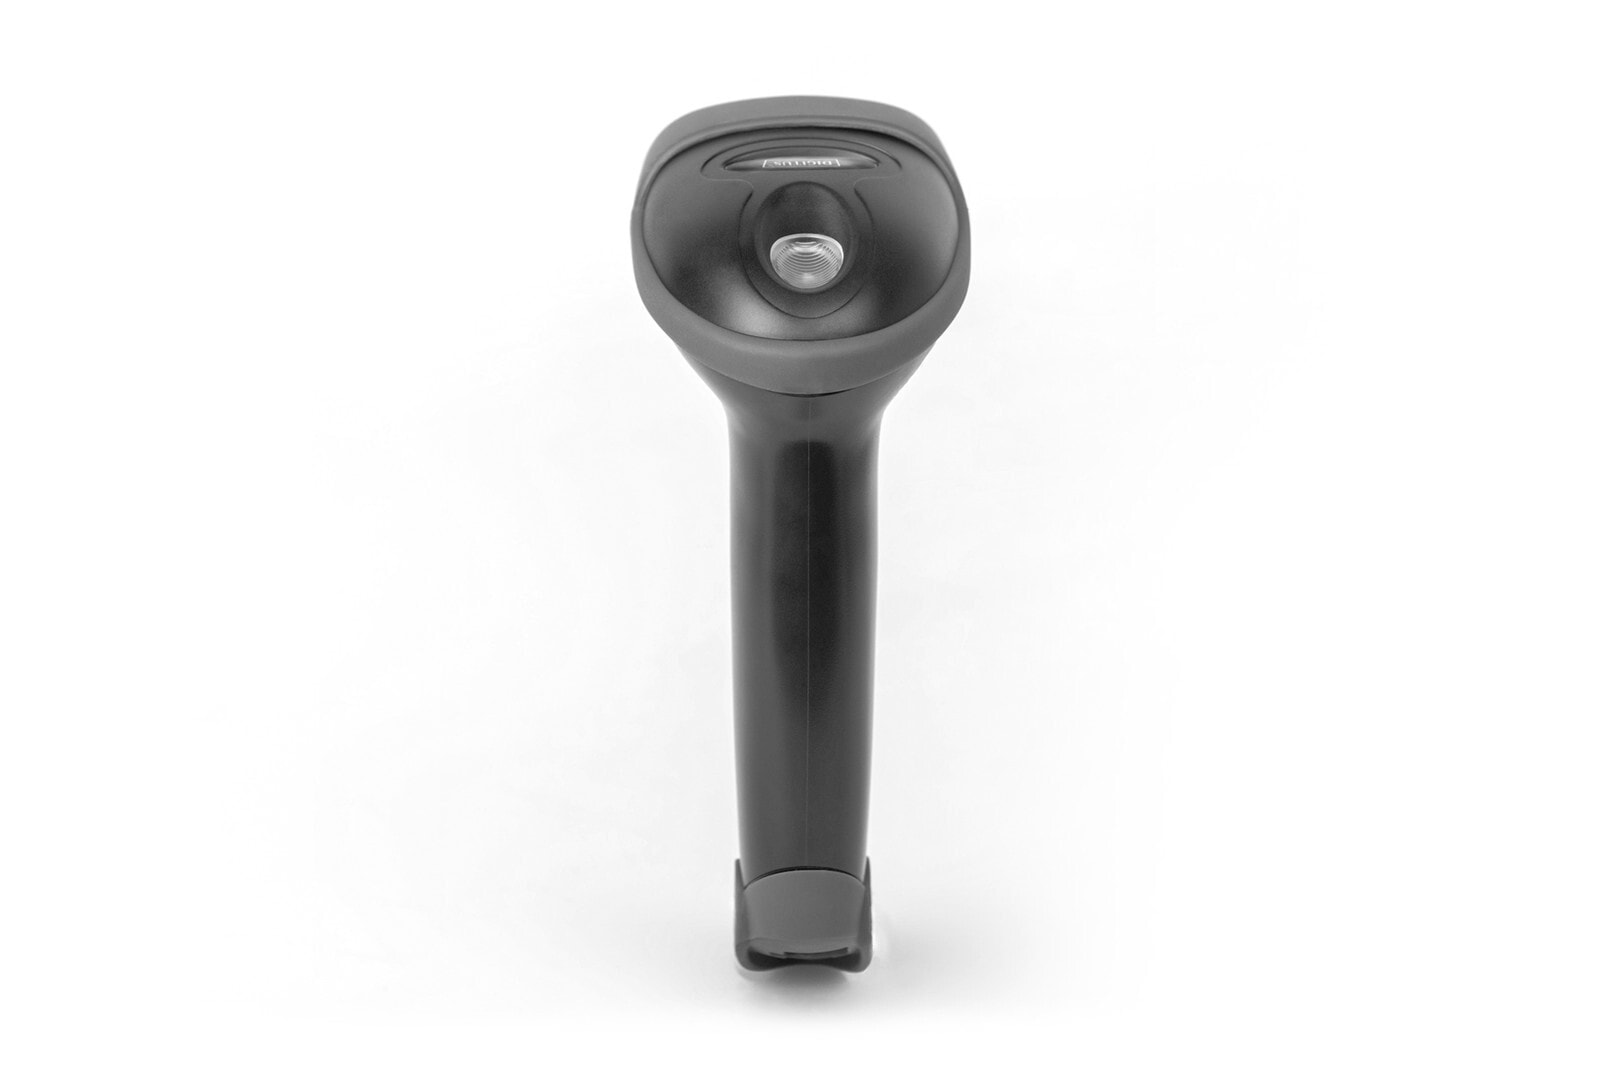 2D Barcode Hand Scanner, Battery-Operated, Bluetooth & QR-Code Compatible